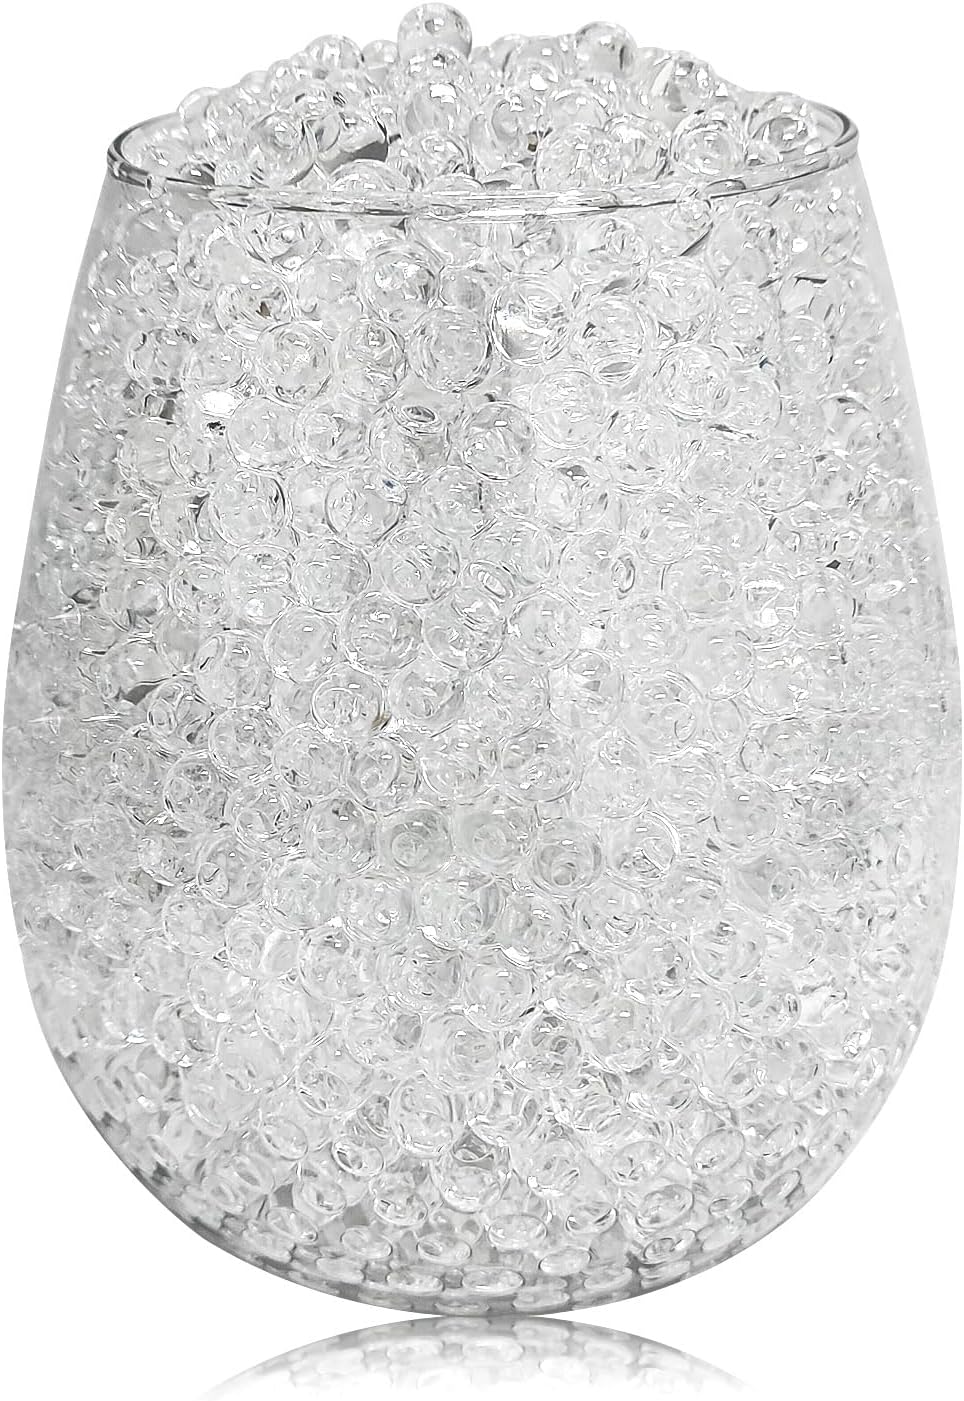 A clear glass bowl filled with Transparent Water Gel Beads